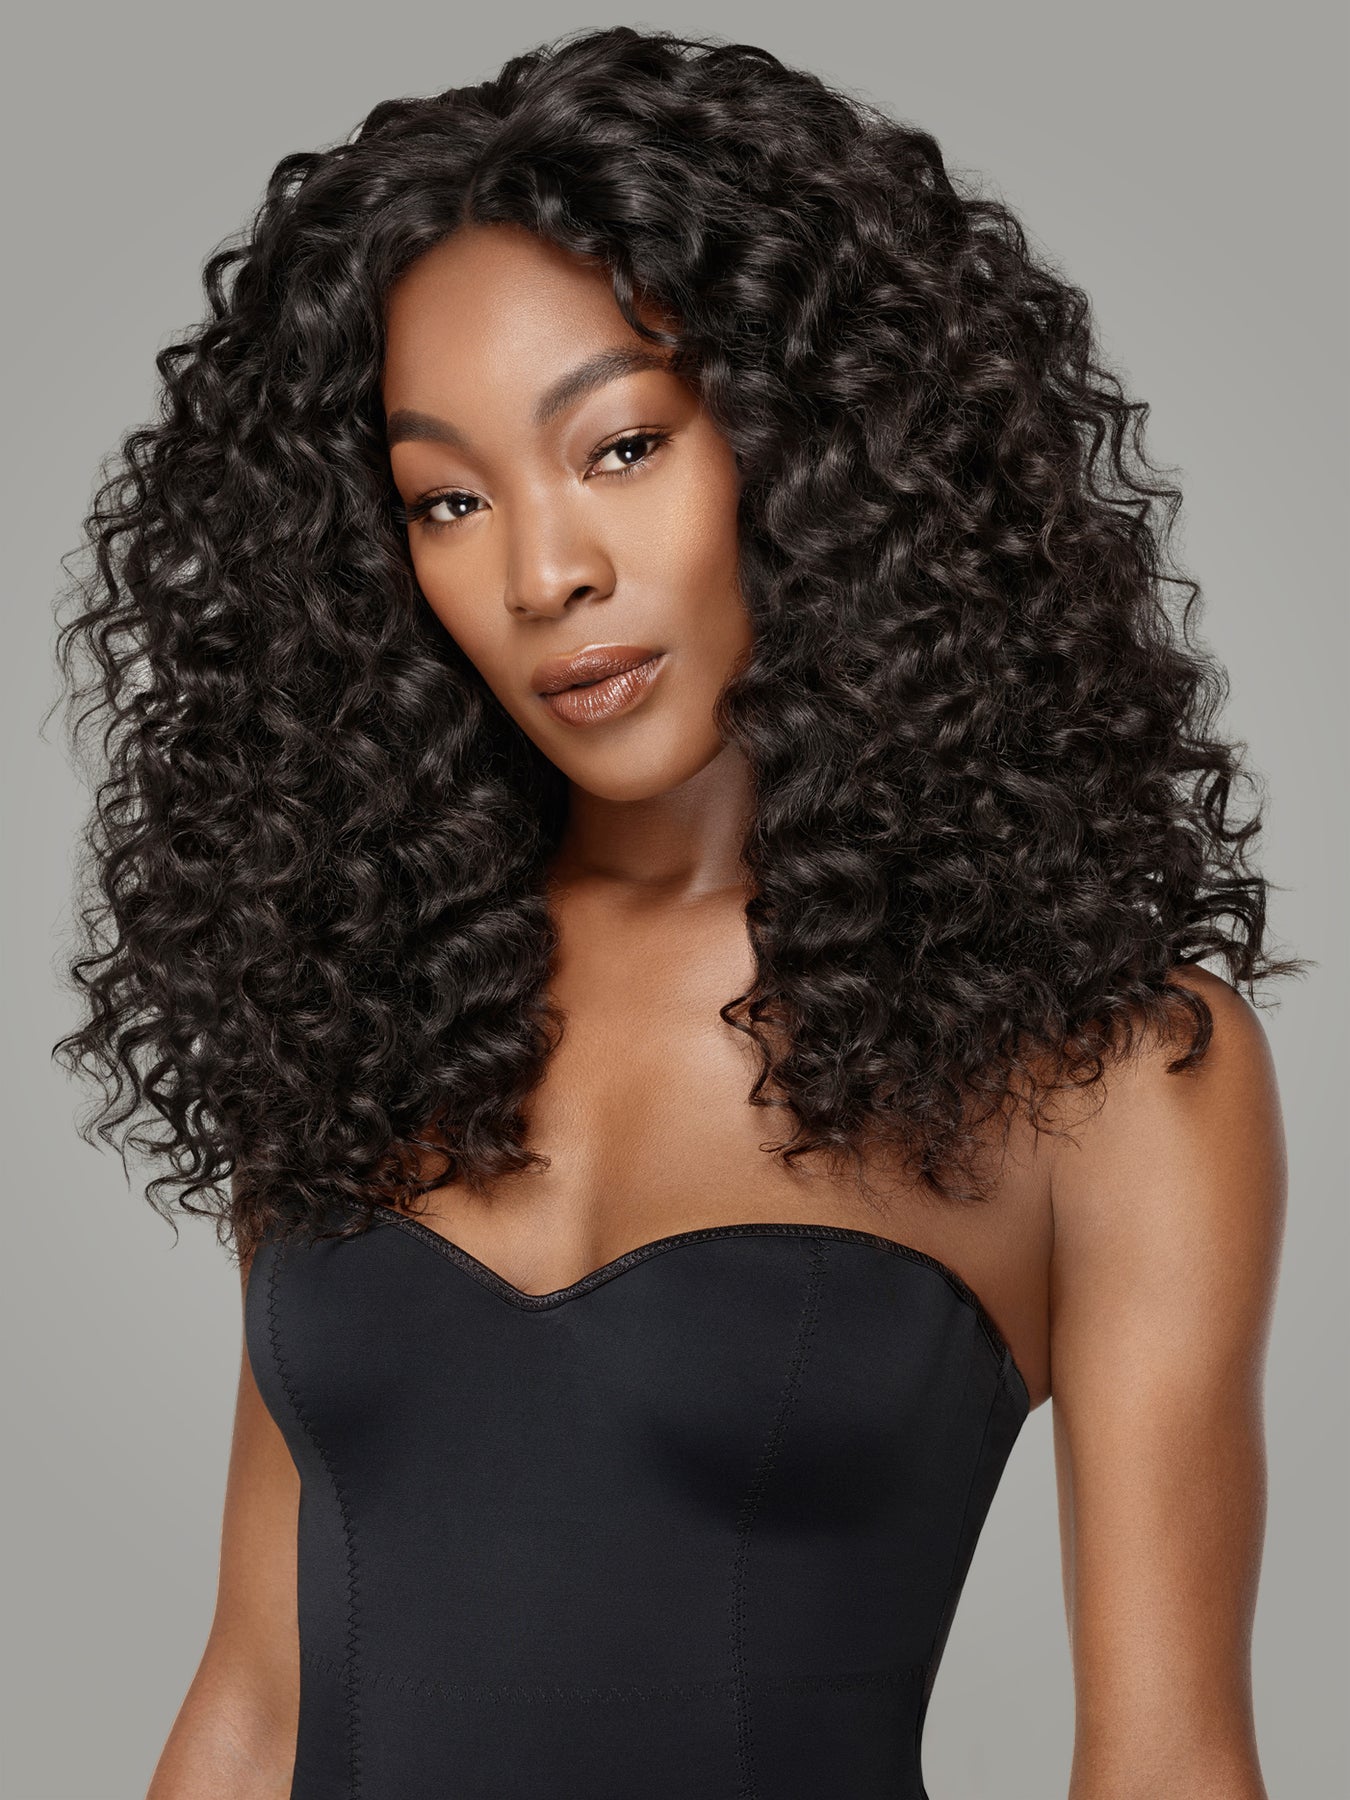 Which Deep Wave Style to Go For?